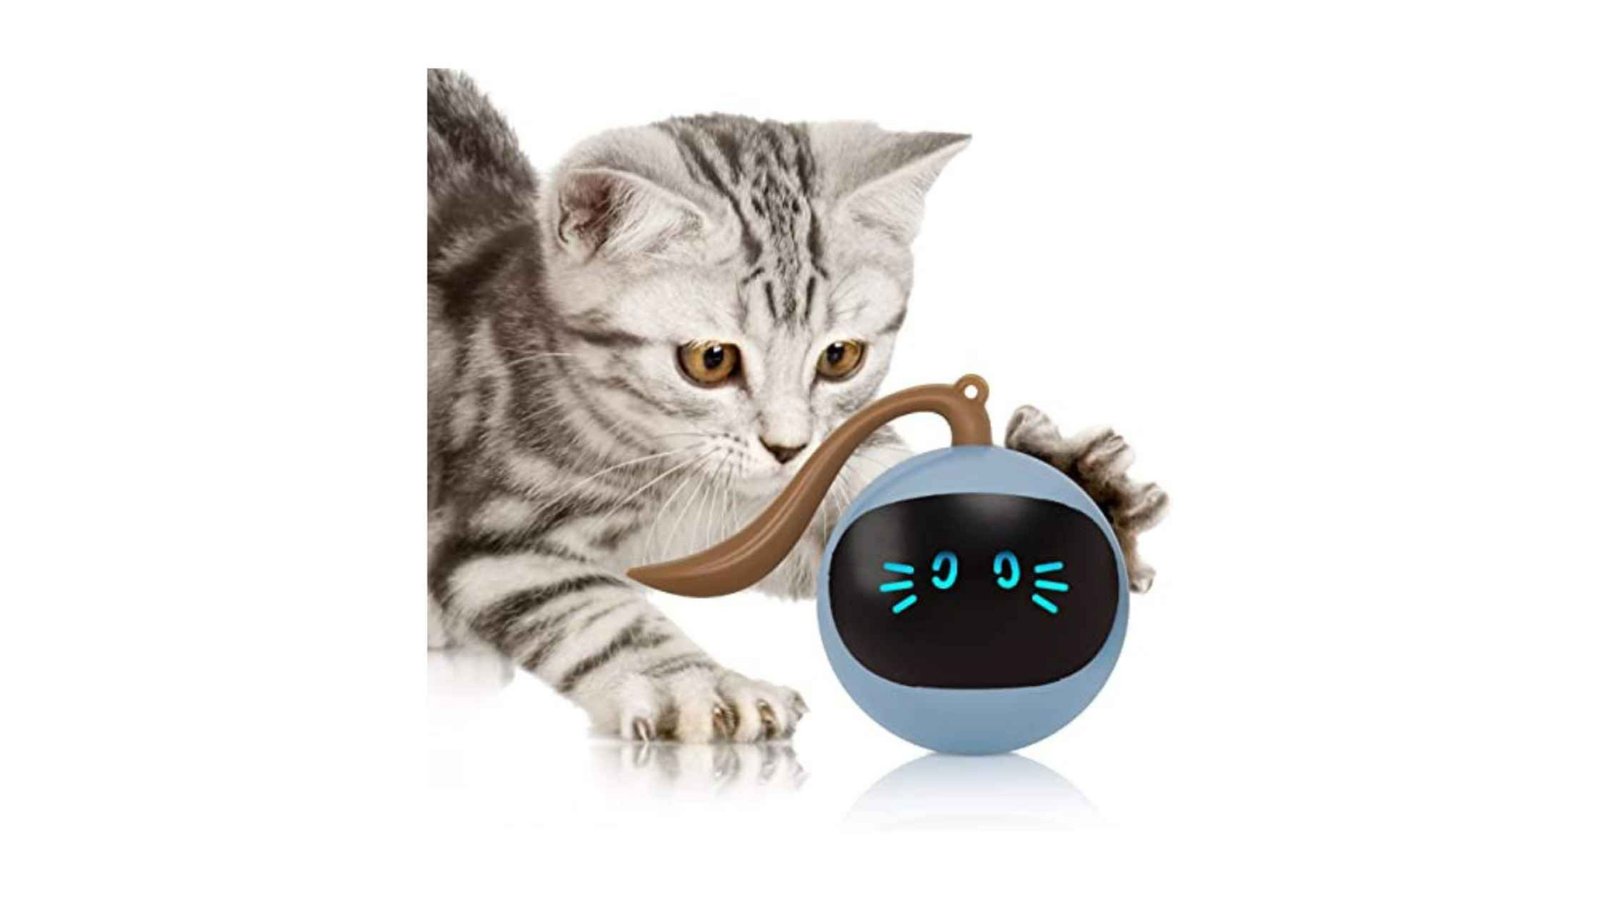 Fofos cat toys